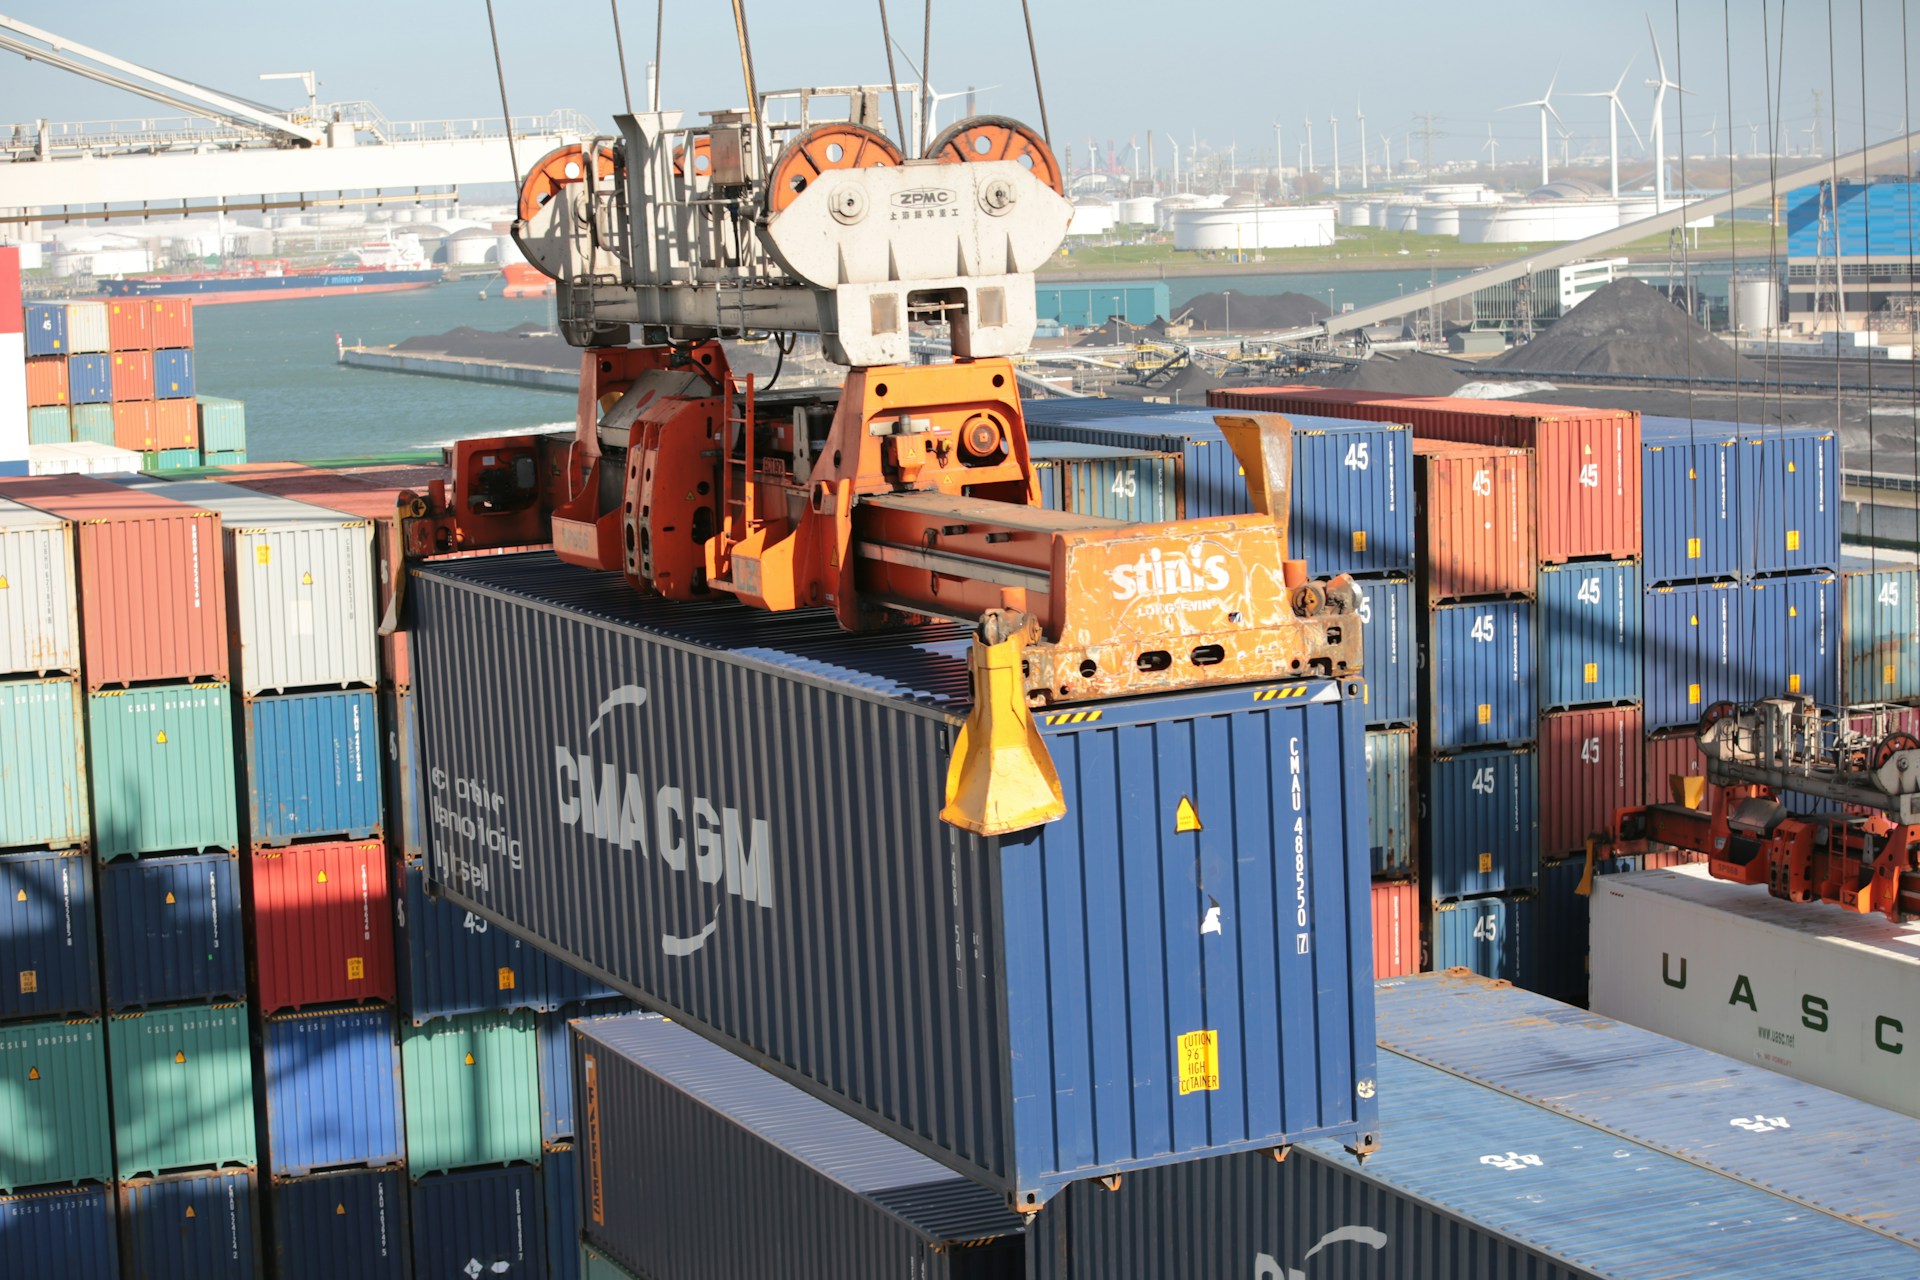  Overweight Fees Announced by CMA CGM for South America